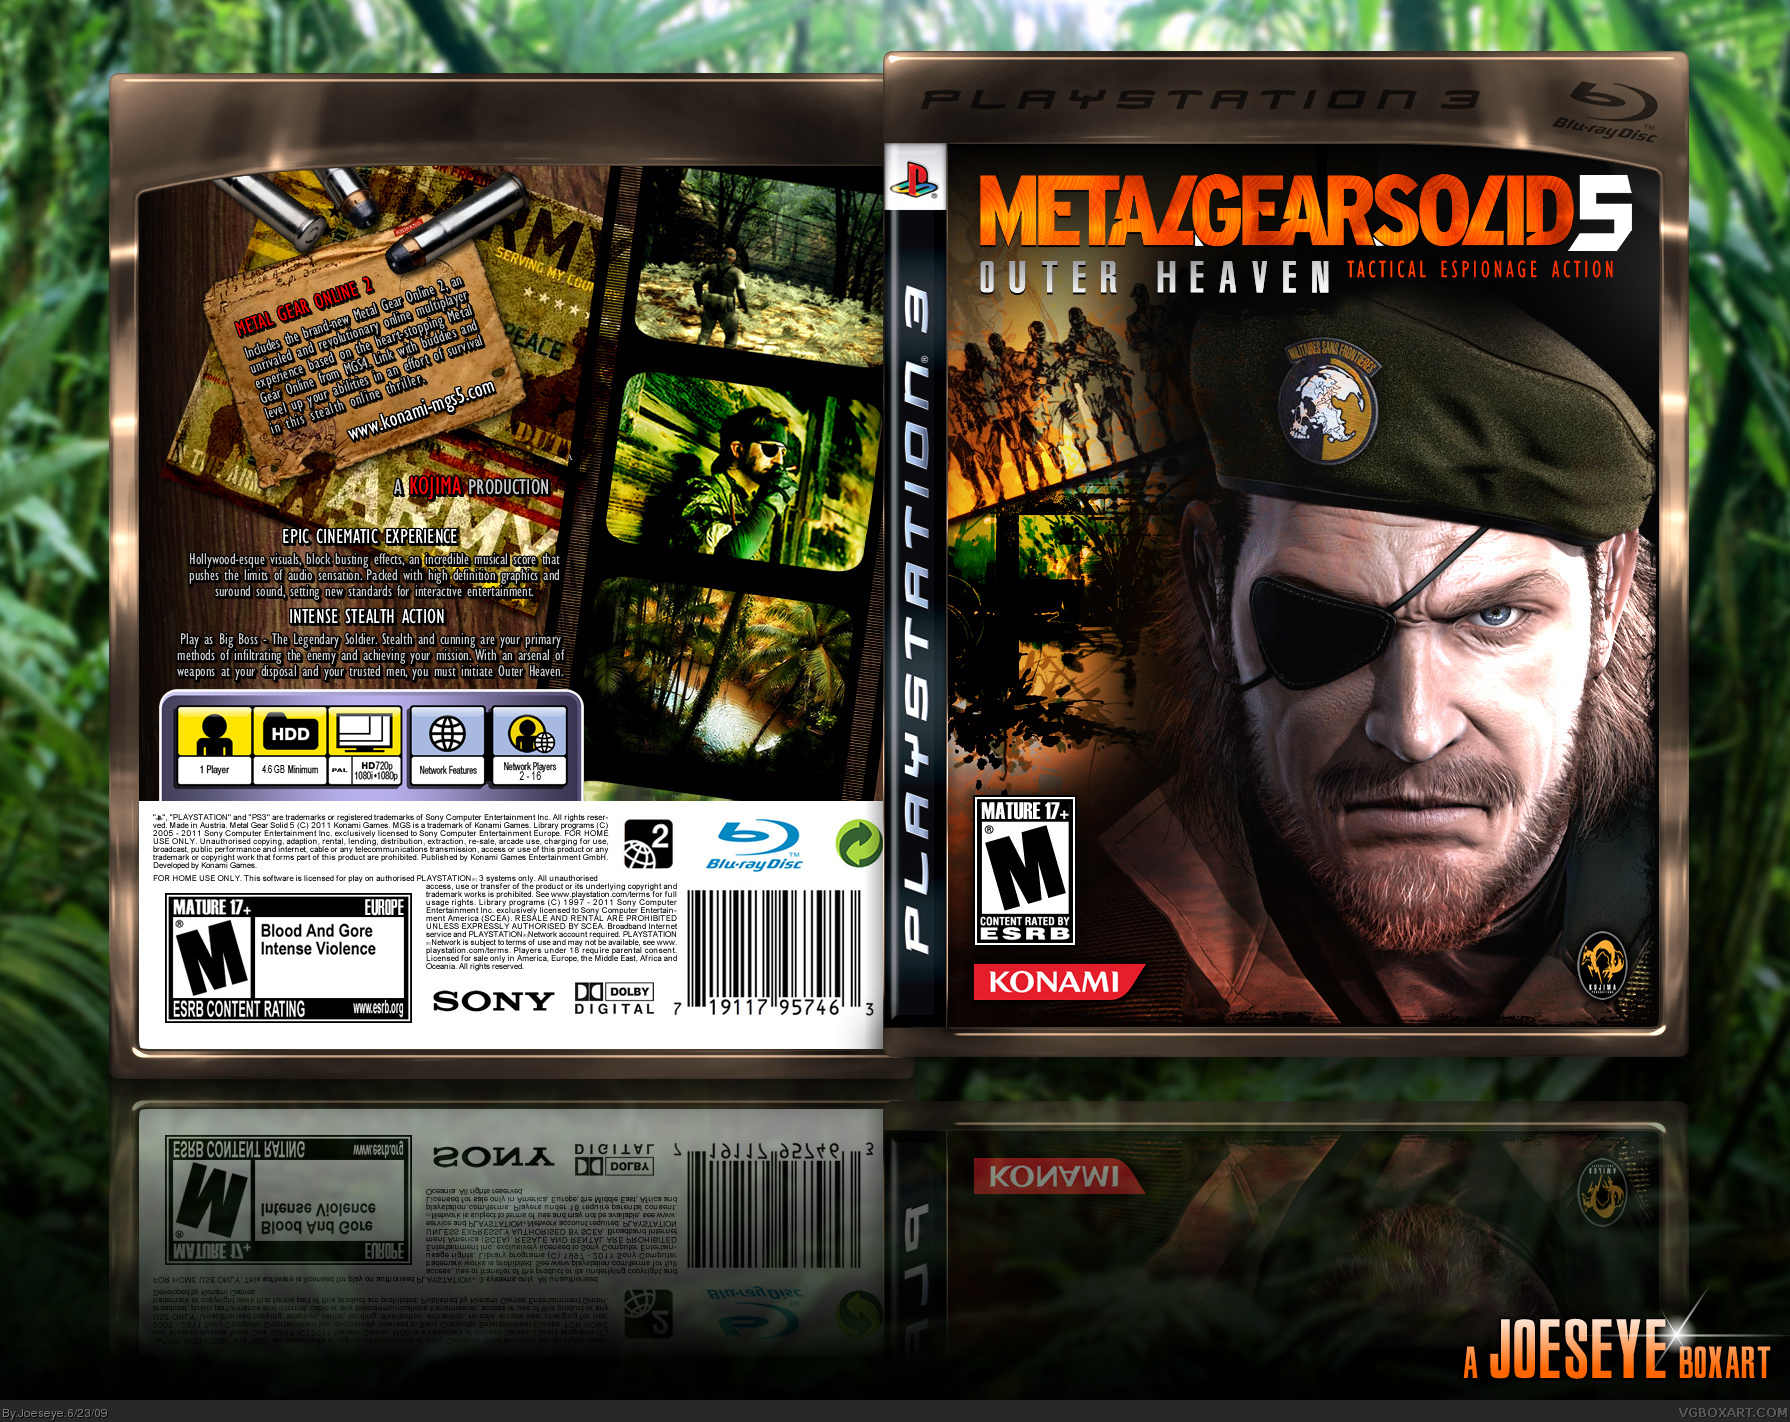 Metal Gear Solid 5: Outer Heaven box cover